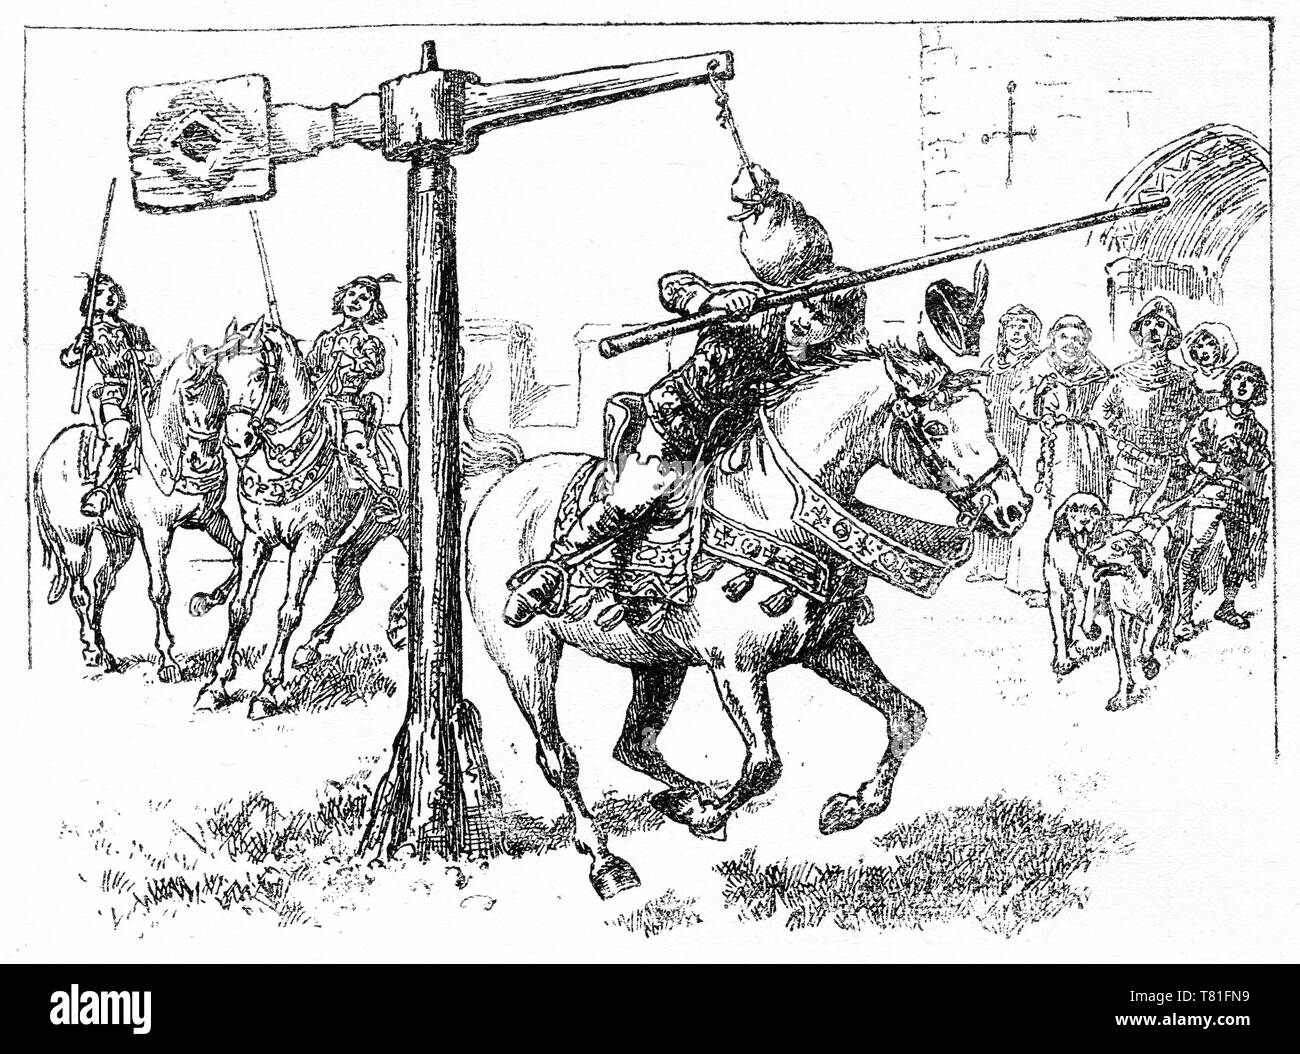 Engraving of a knight in training who has successfully hit his target without being hit himself by the counterbalance. From Chatterbox magazine, 1917 Stock Photo